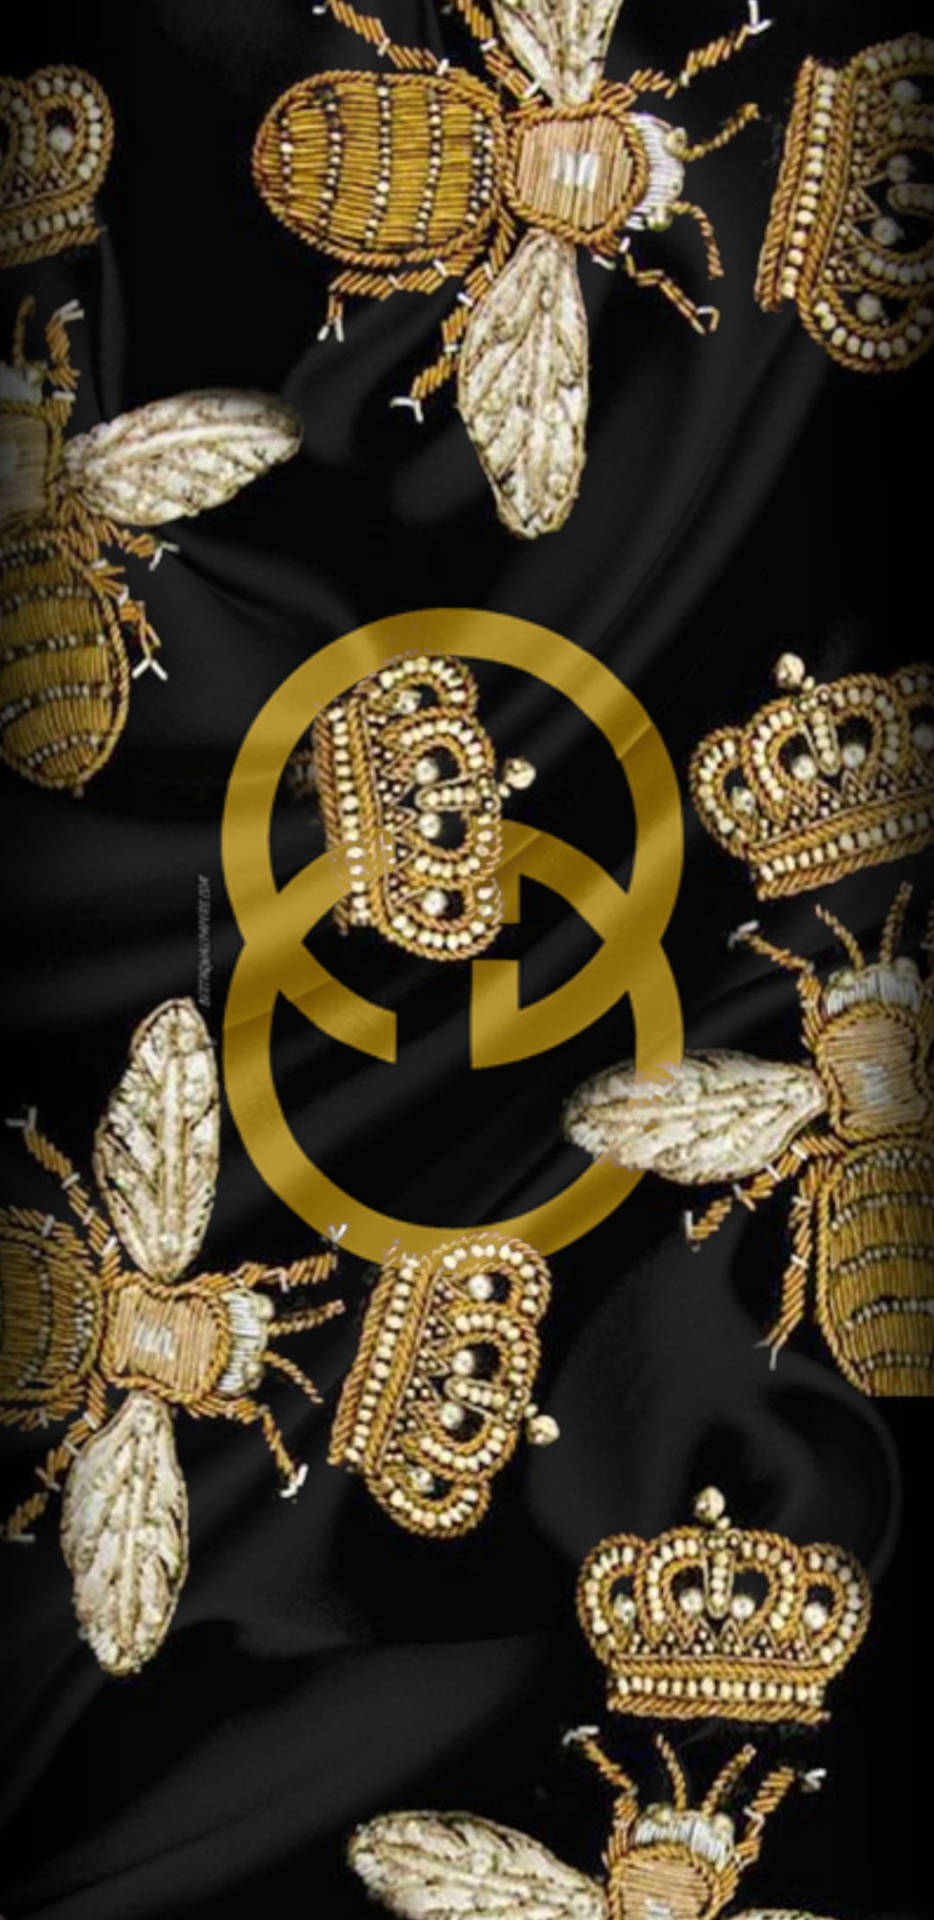 Gucci Wallpaper Discover more Background, cool, Gold, Iphone, Lock